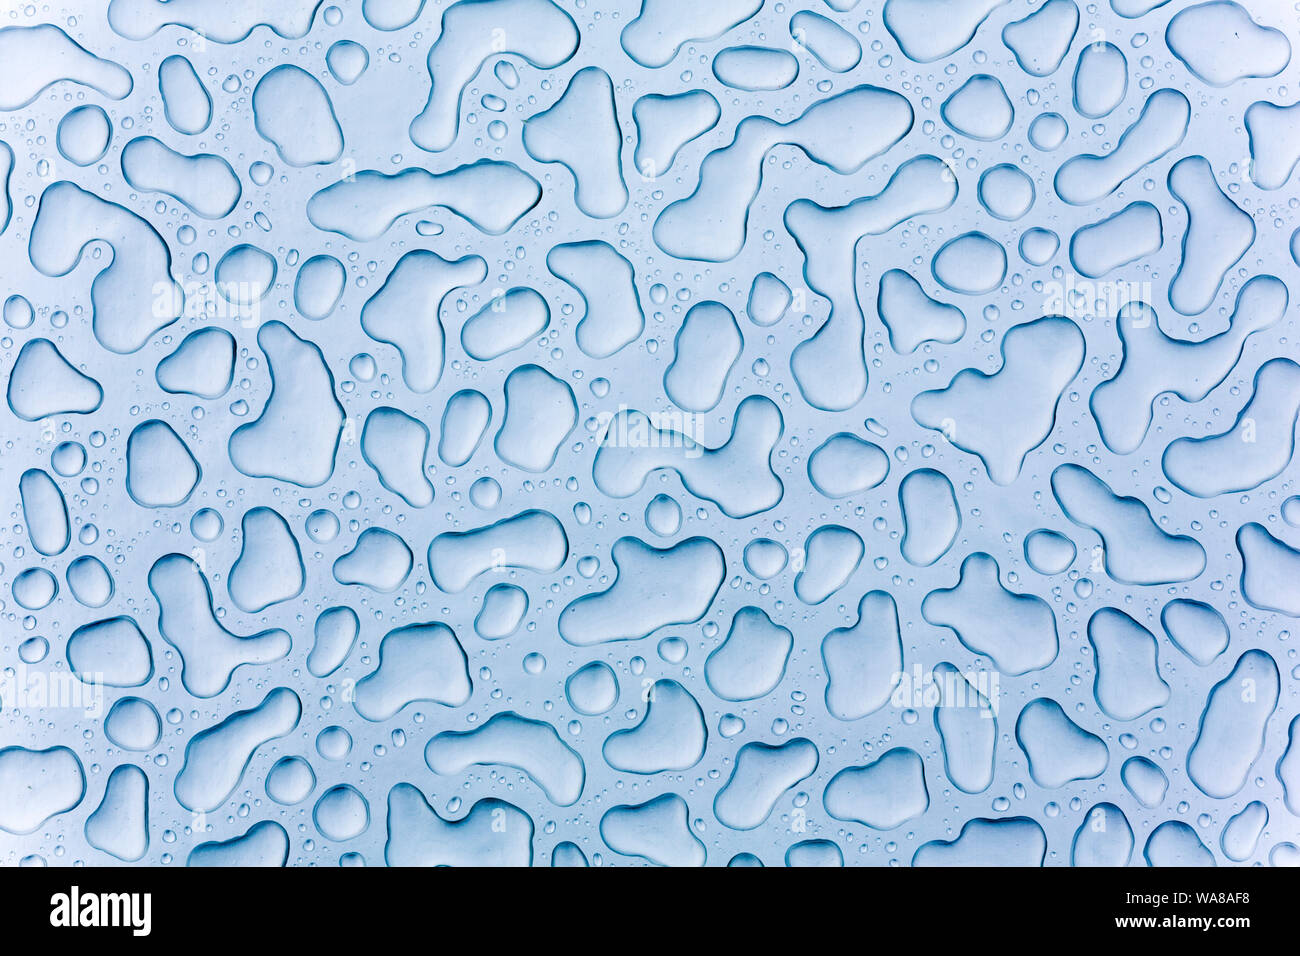 water droplets on glass Stock Photo